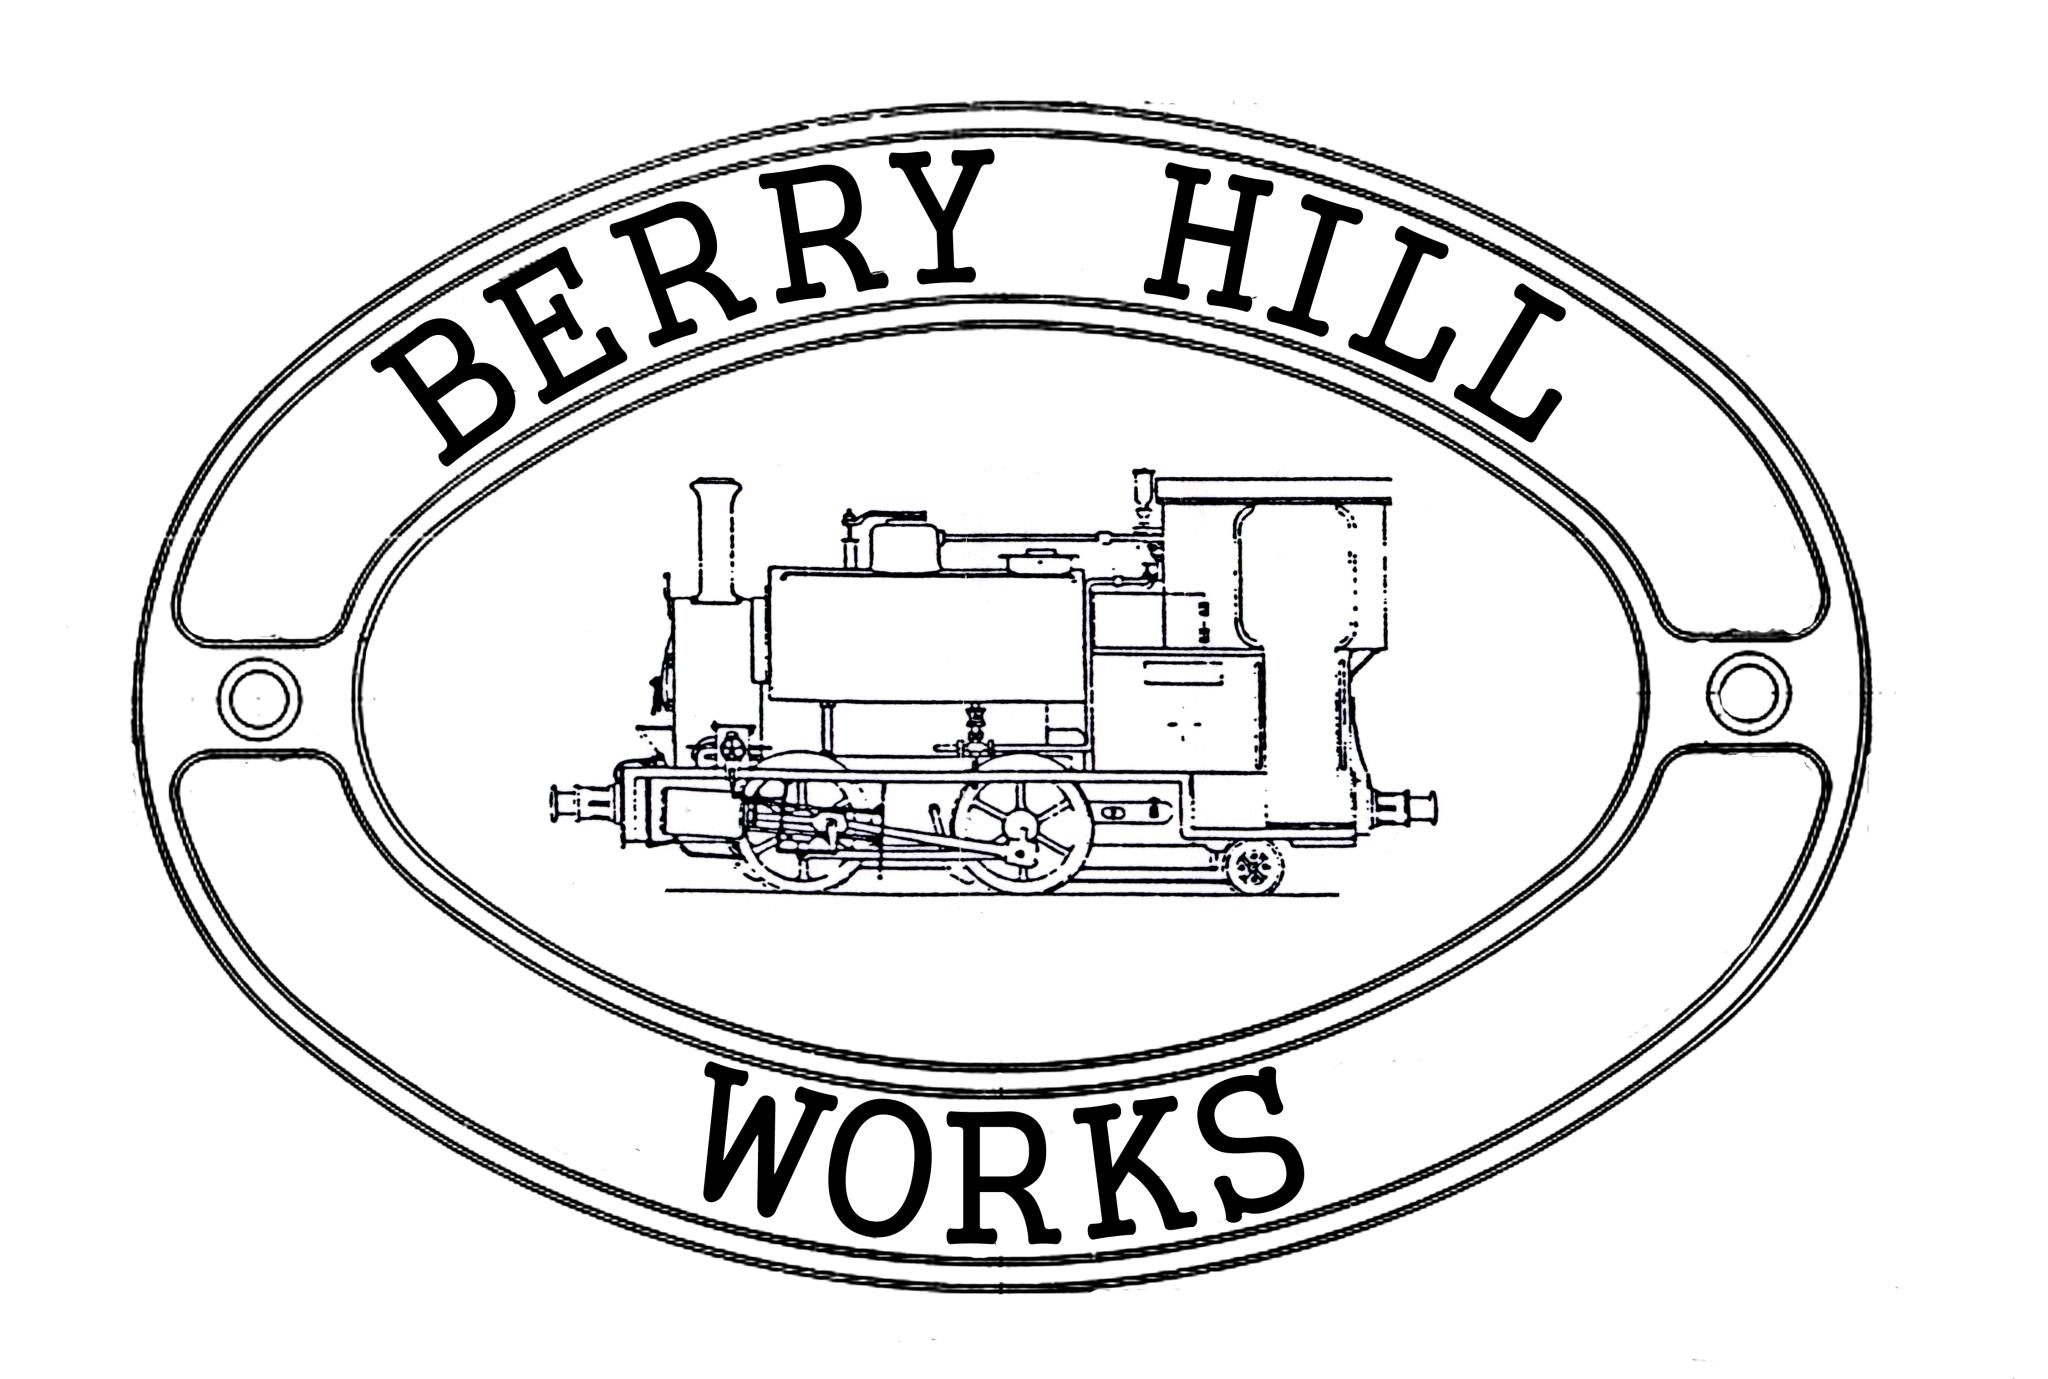 Berry Hill Works Logo